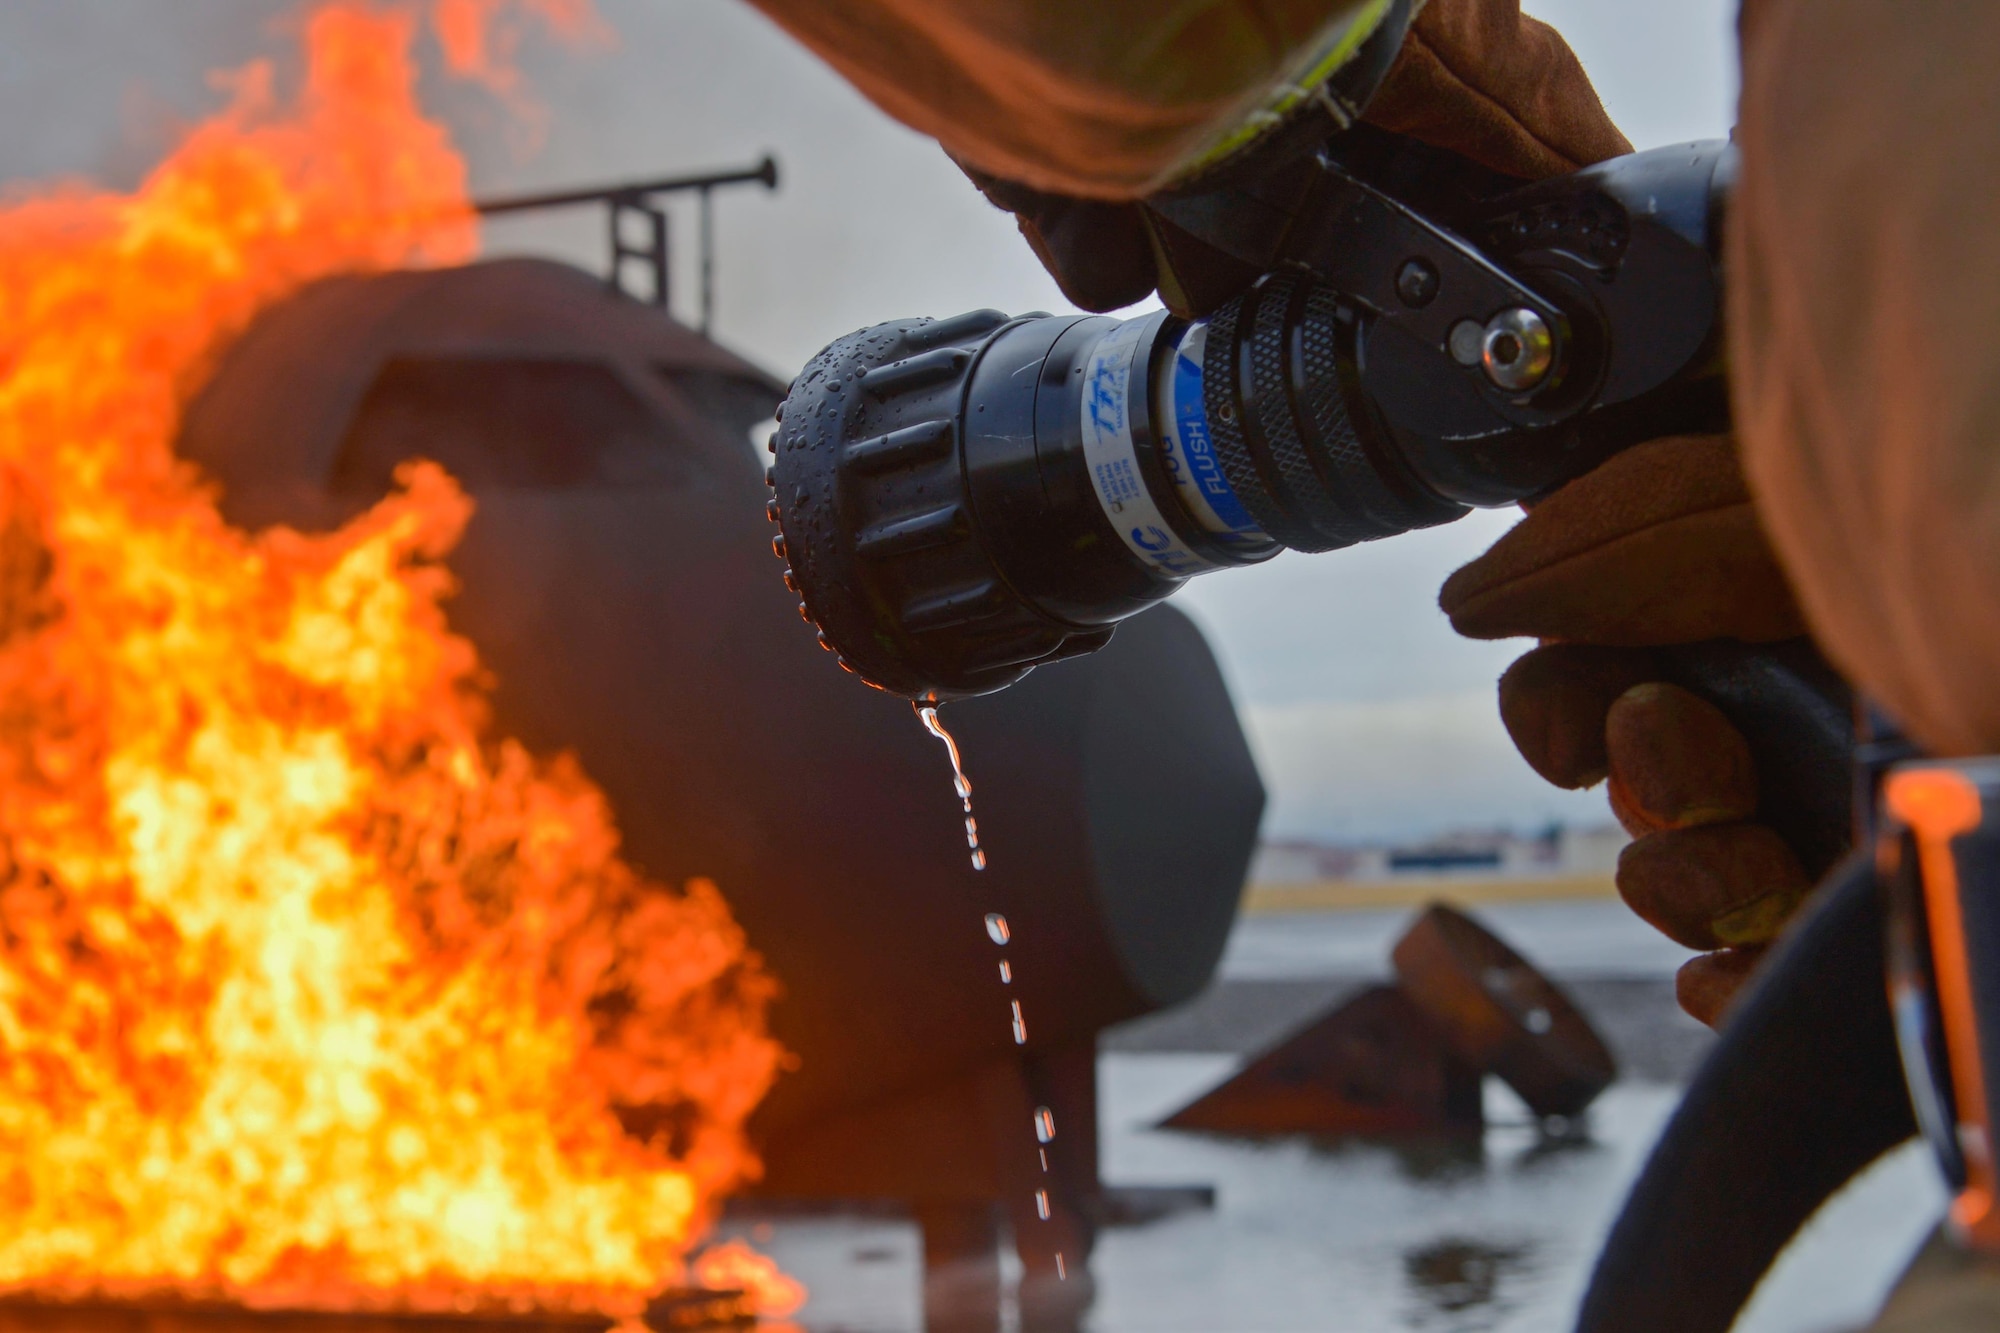 A firefighter with the 374th Civil Engineer Squadron holds a fire hose during a training scenario at Yokota Air Base, Japan, Dec. 14, 2016. The training helped the firefighters gain experience and build cohesiveness to work as a better team for potential real-world scenarios. (U.S. Air Force photo by Staff Sgt. David Owsianka)